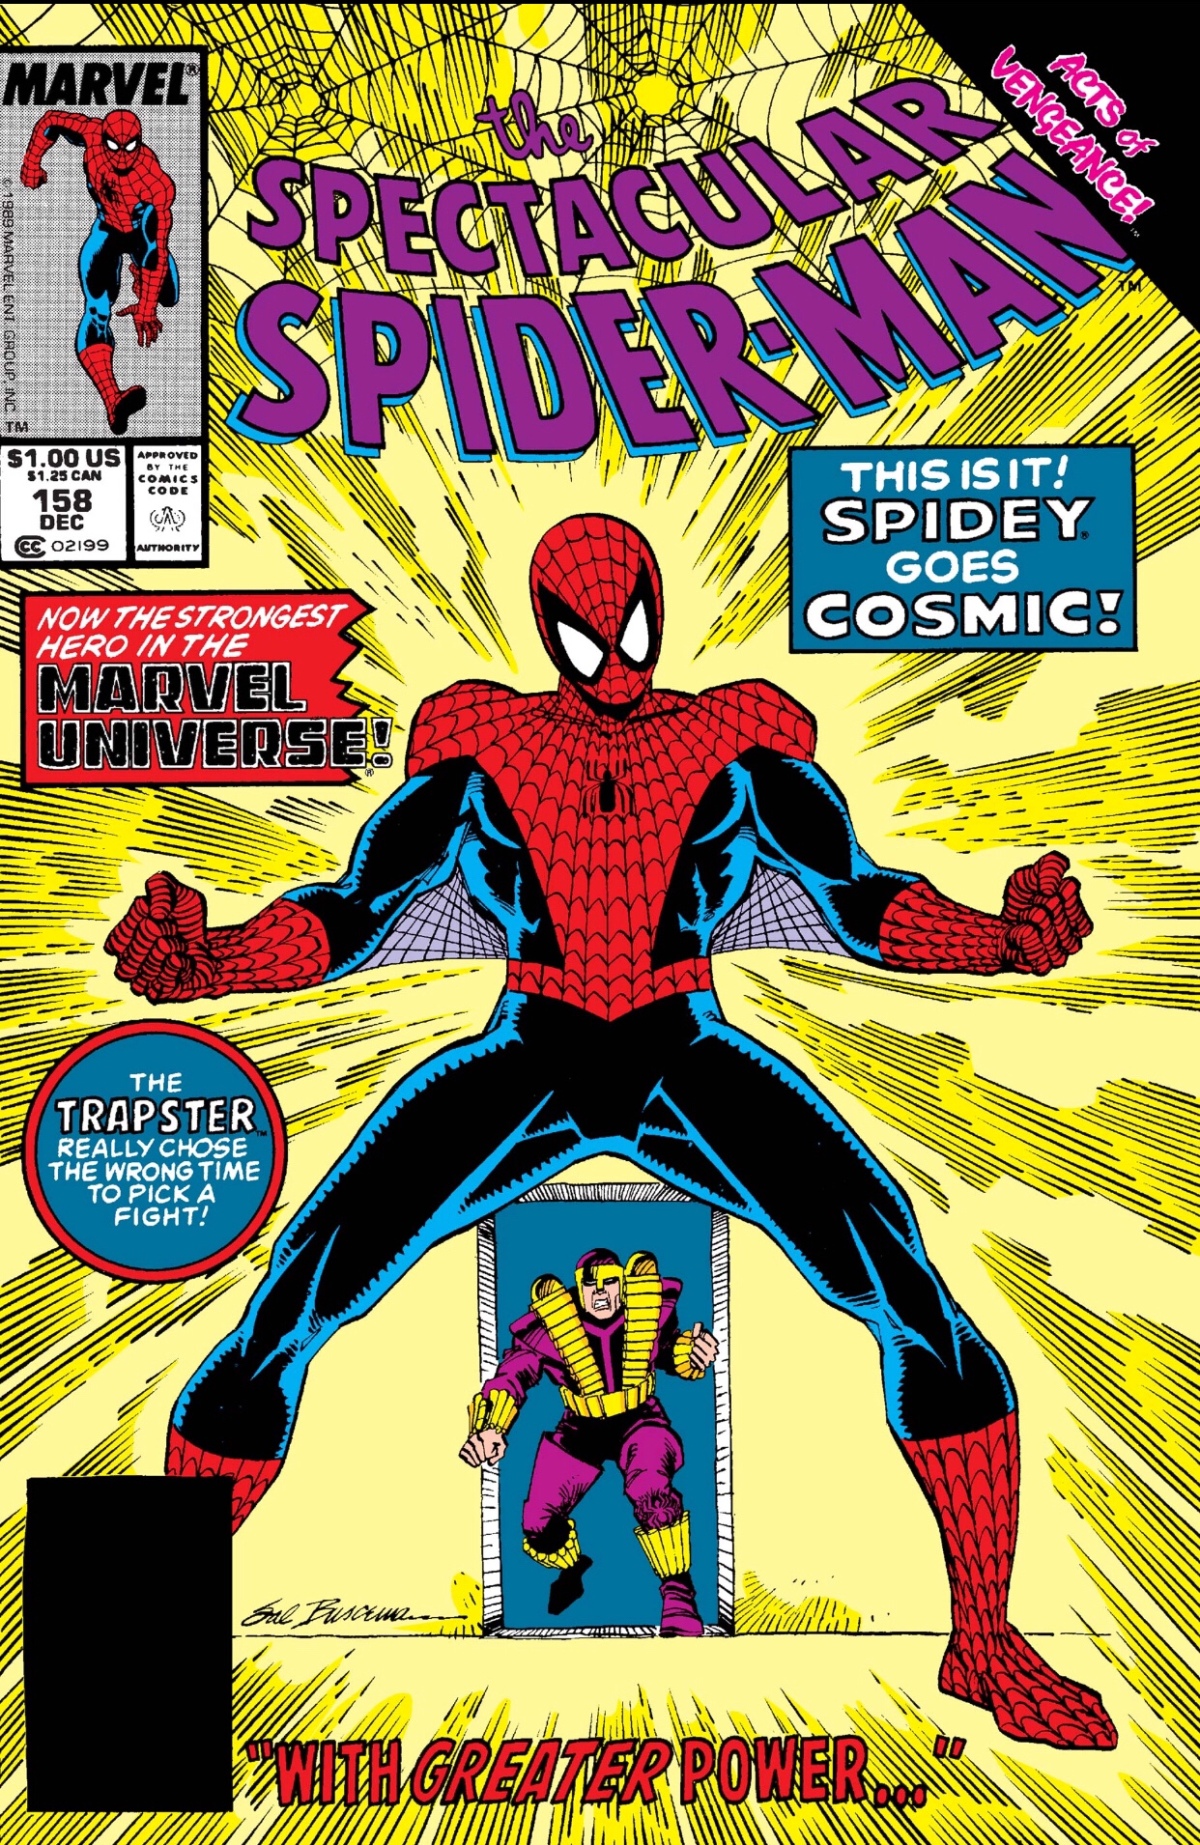 Cosmic Powered Spectacular Spider-Man vs. The Trapster (The Spectacular Spider-Man #158)